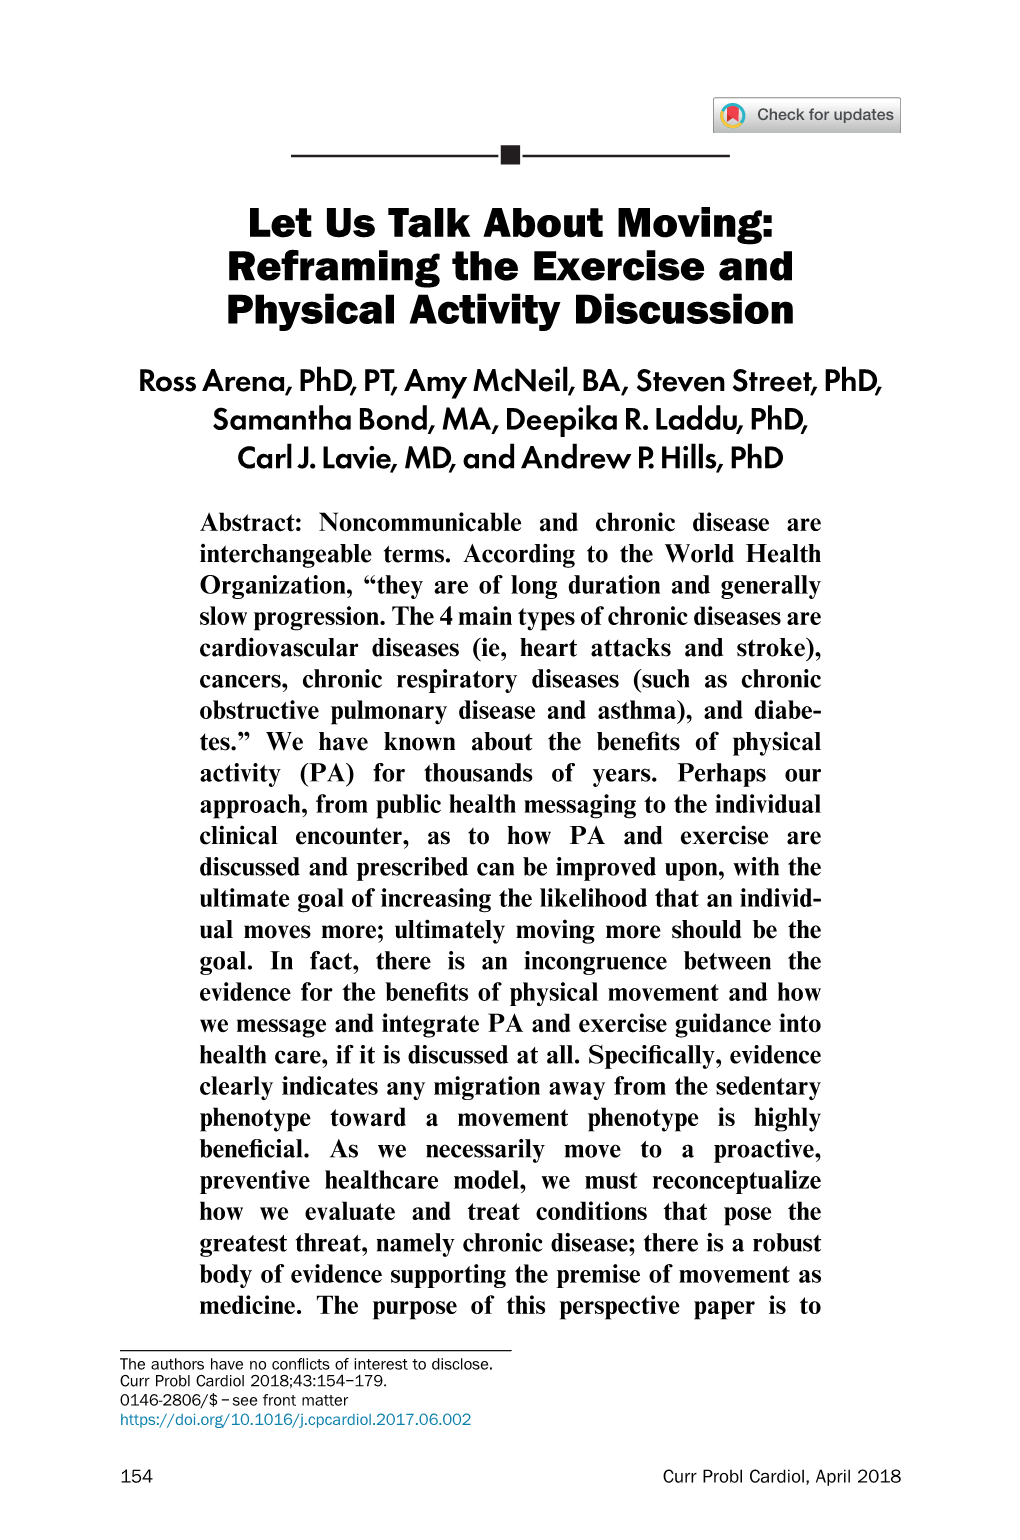 Let Us Talk About Moving Reframing the Exercise and Physical Activity